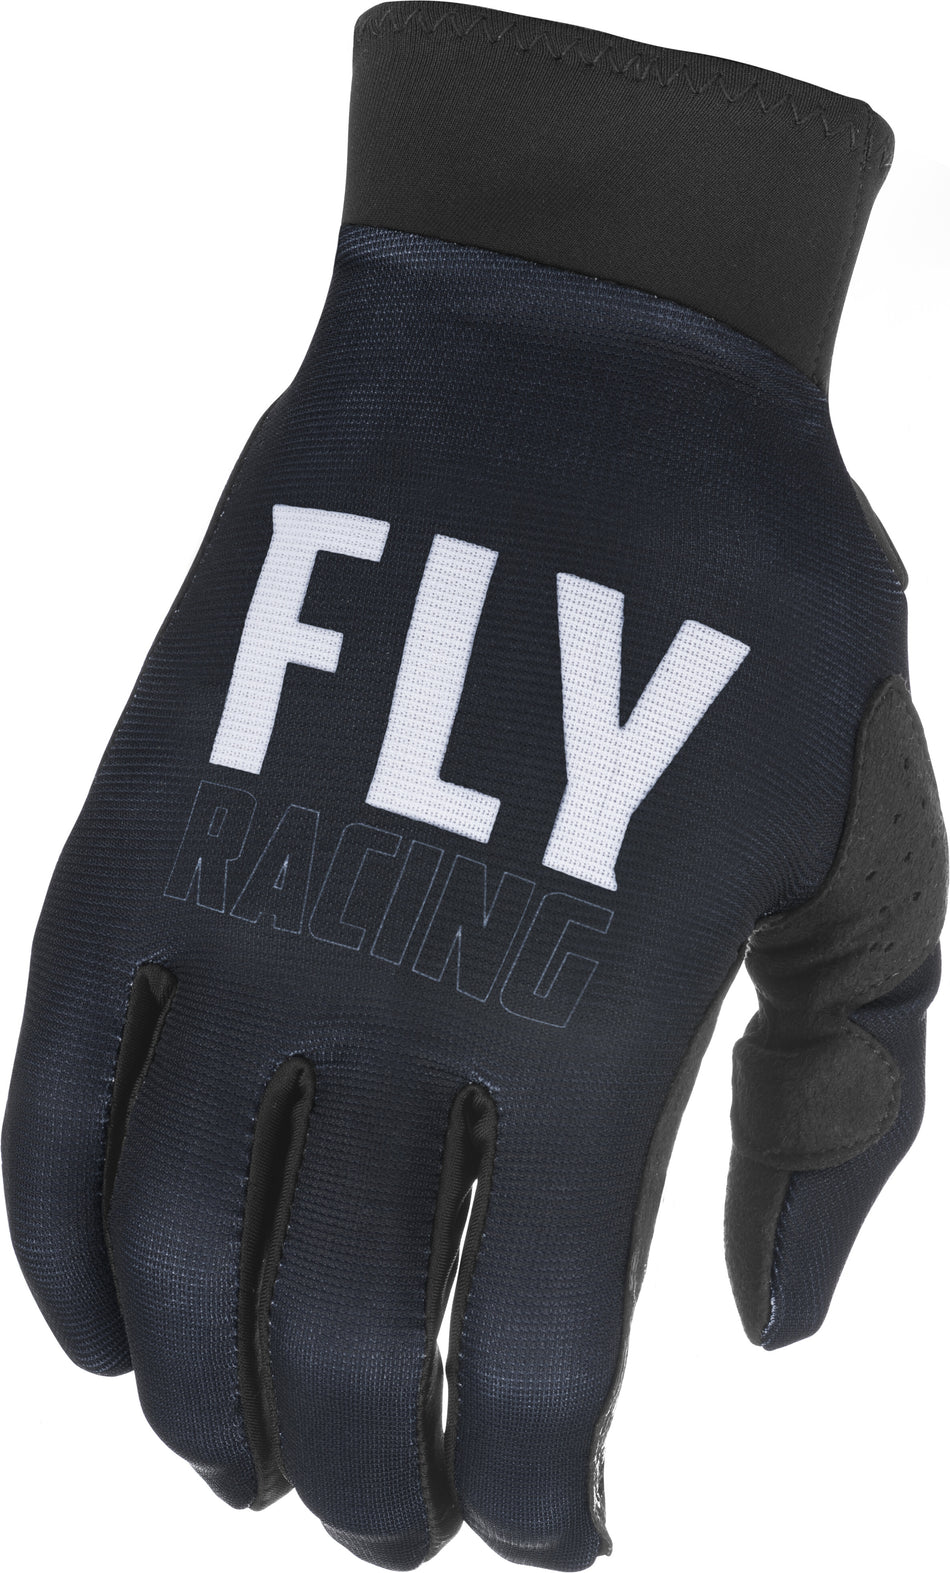 FLY RACING Youth Pro Lite Gloves Black/White Sz 06 374-85006